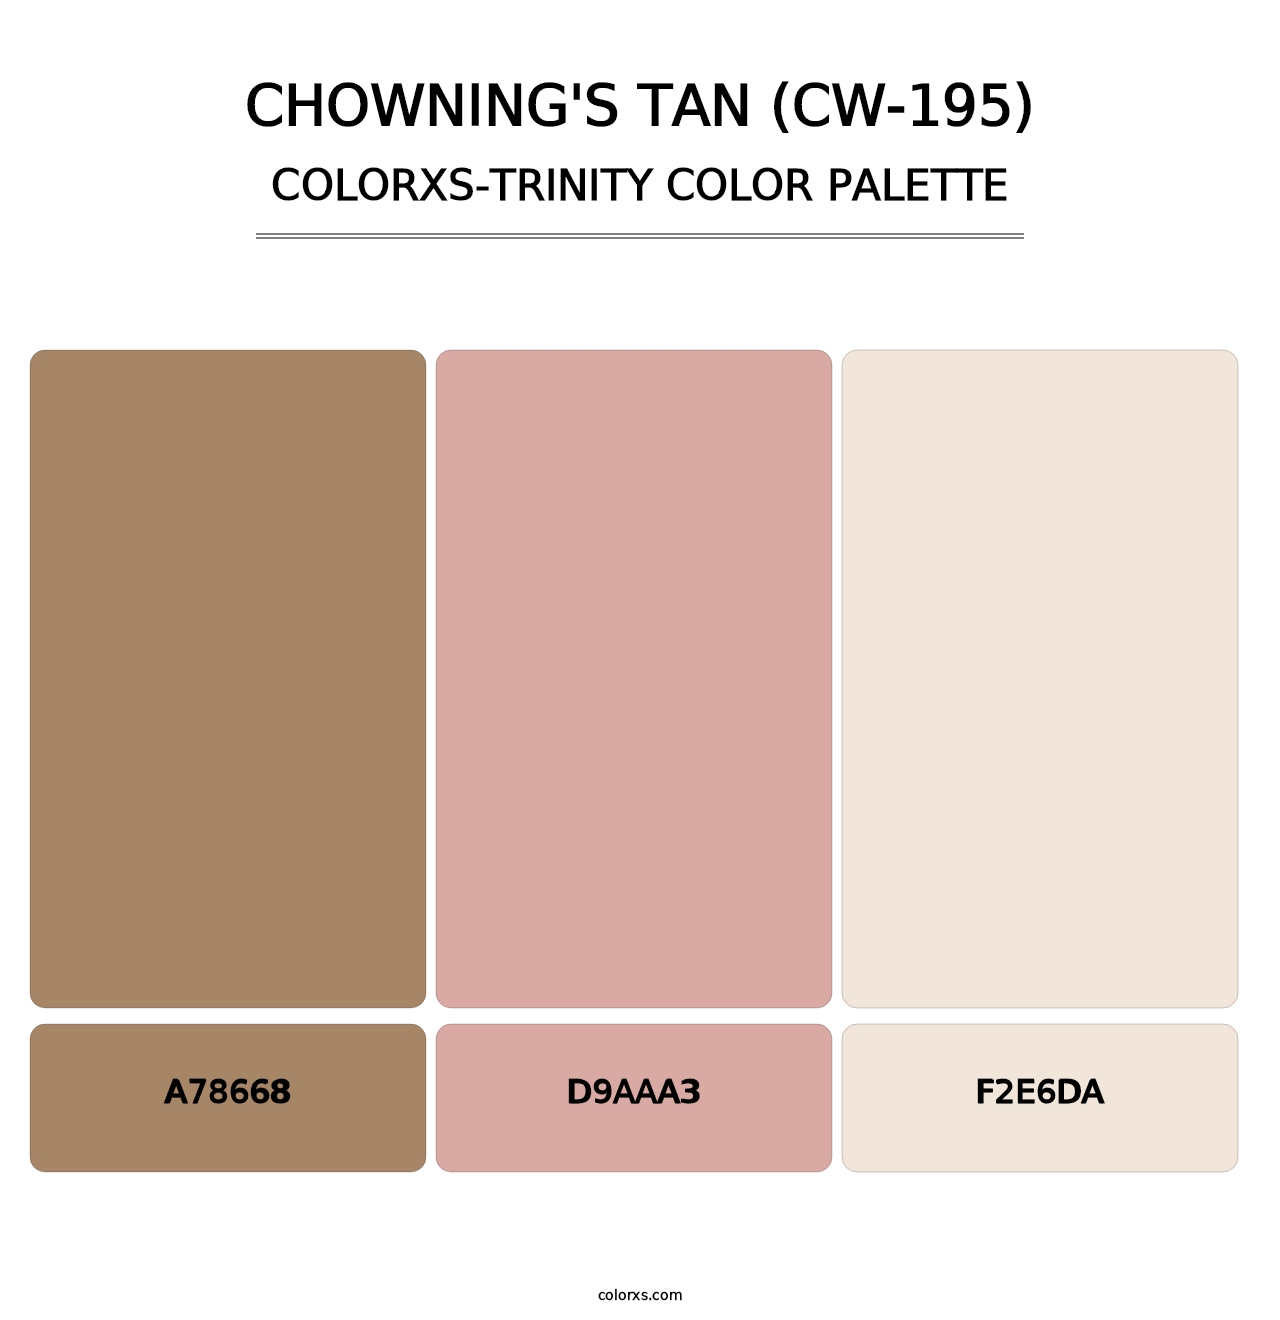 Chowning's Tan (CW-195) - Colorxs Trinity Palette